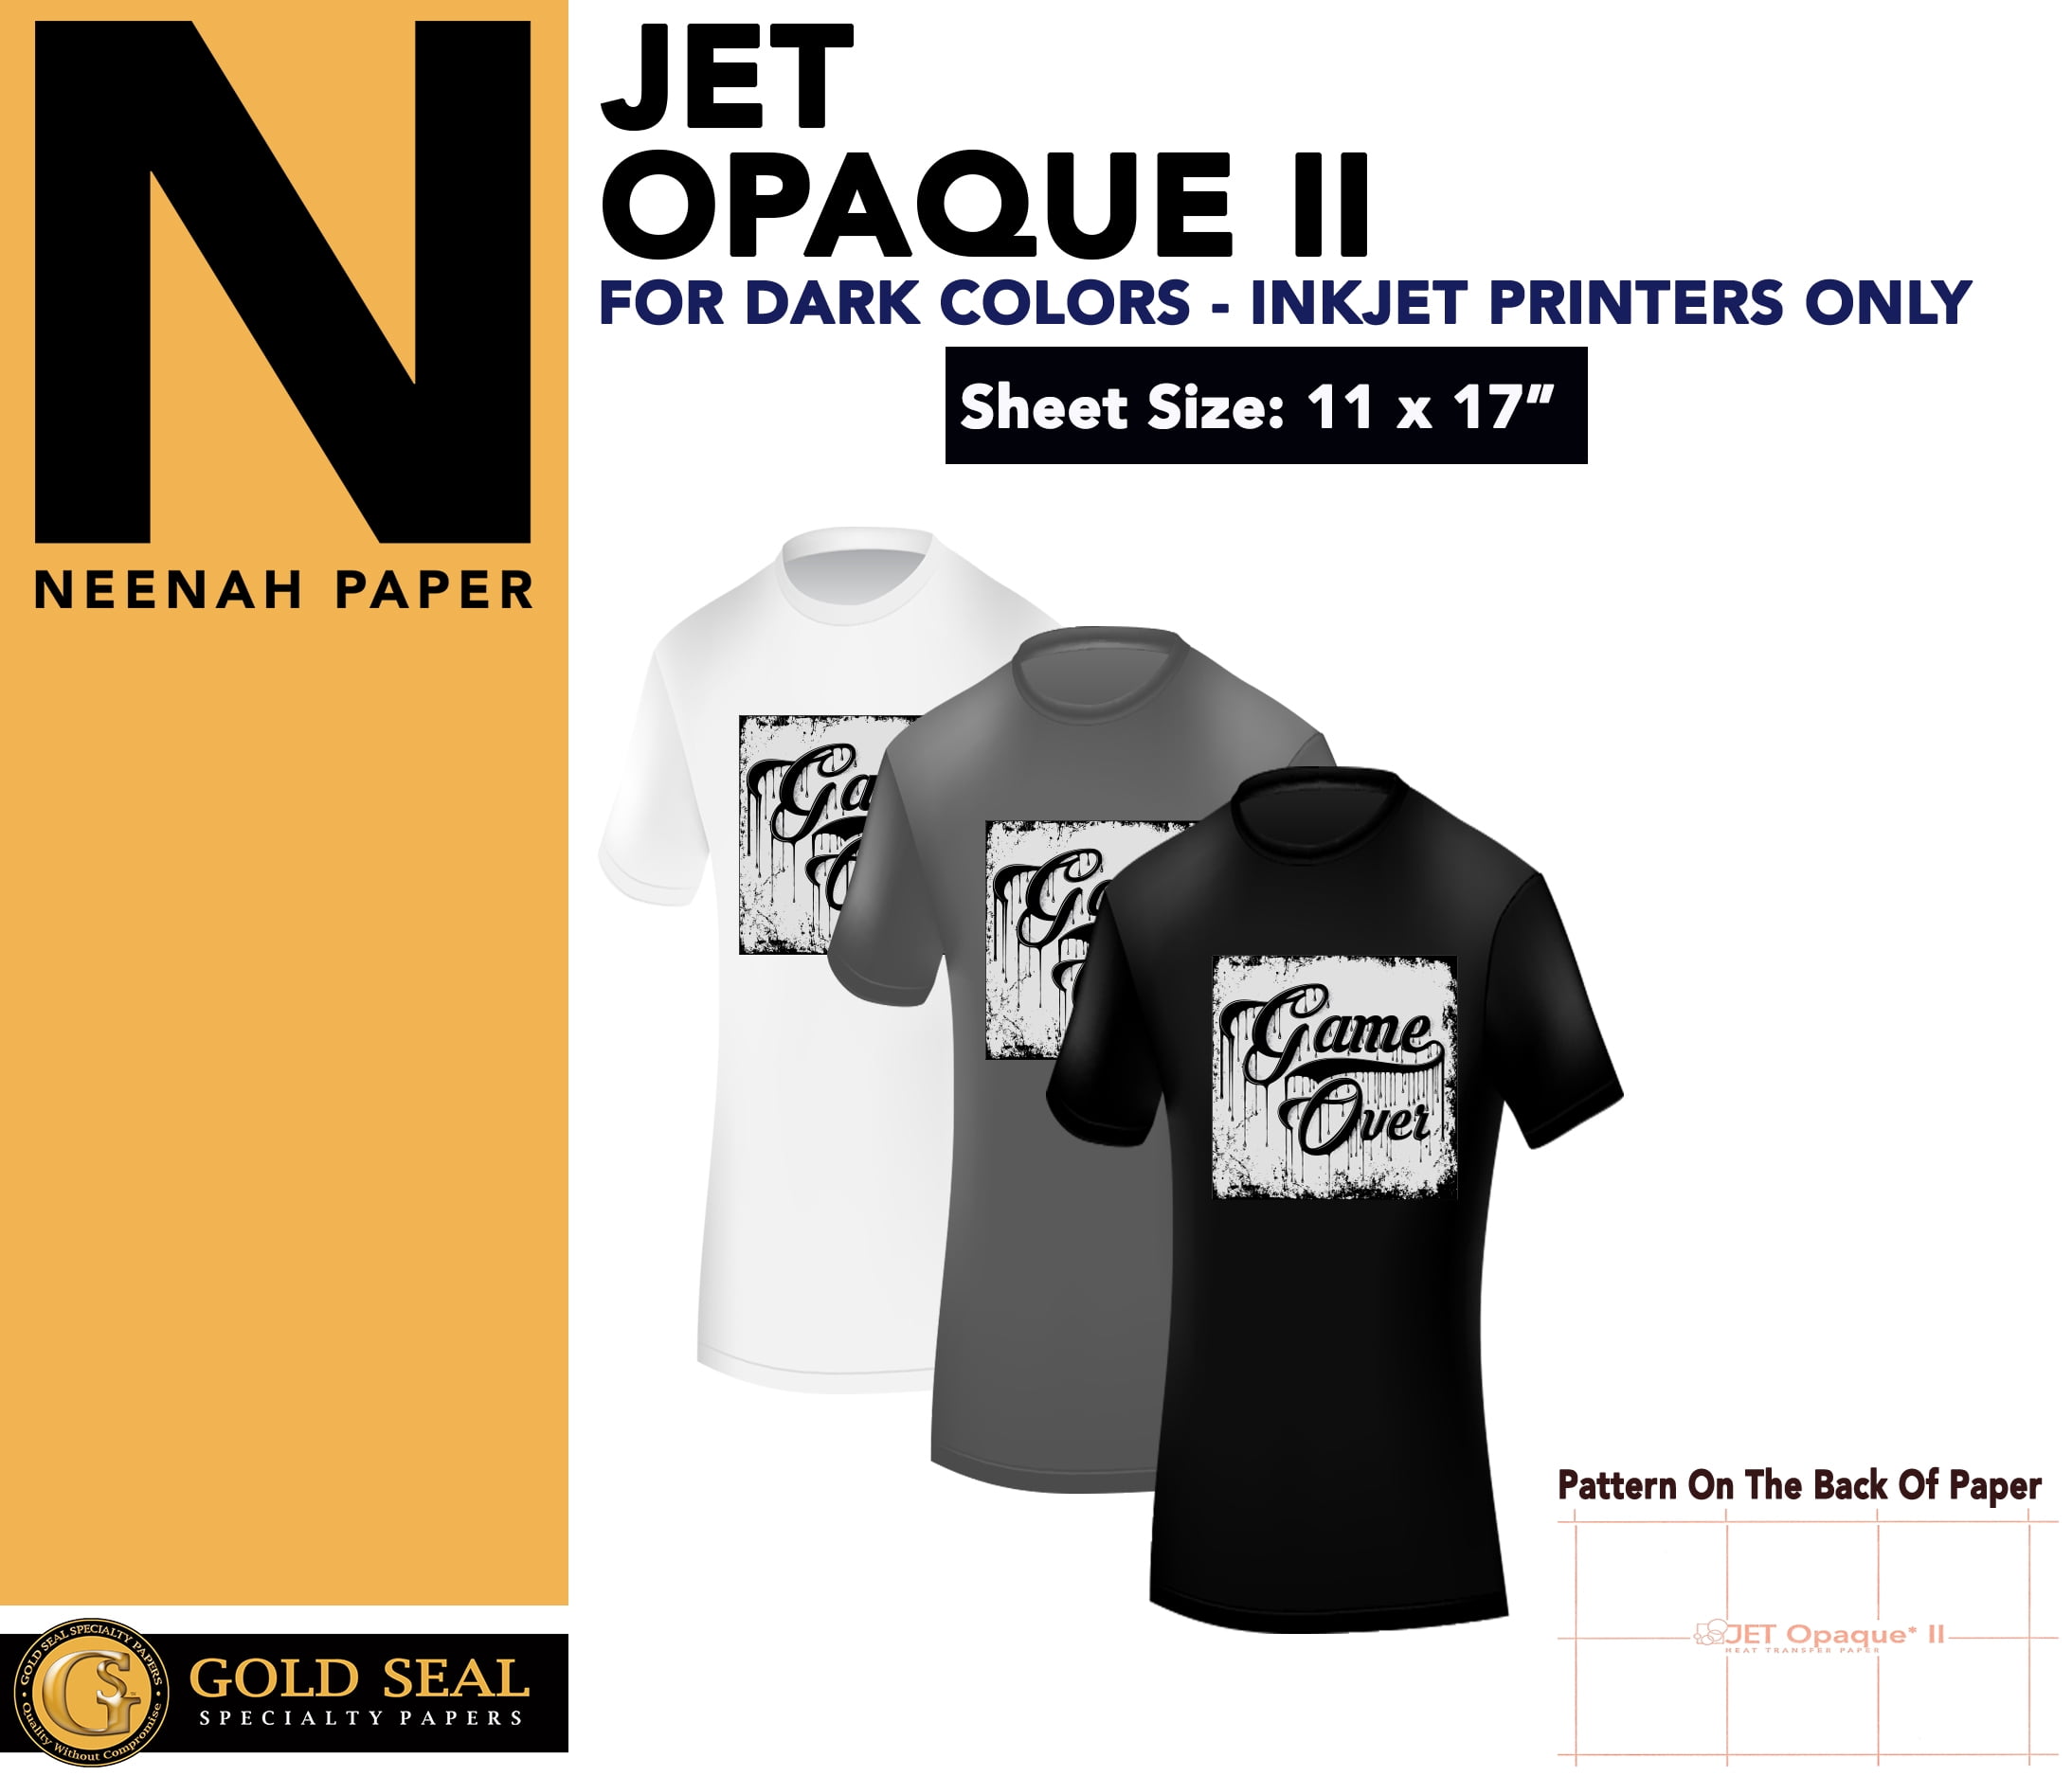 INKJET TRANSFER PAPER FOR DARK FABRIC A3 SIZE NEENAH "3G JET OPAQUE" 250 CT 